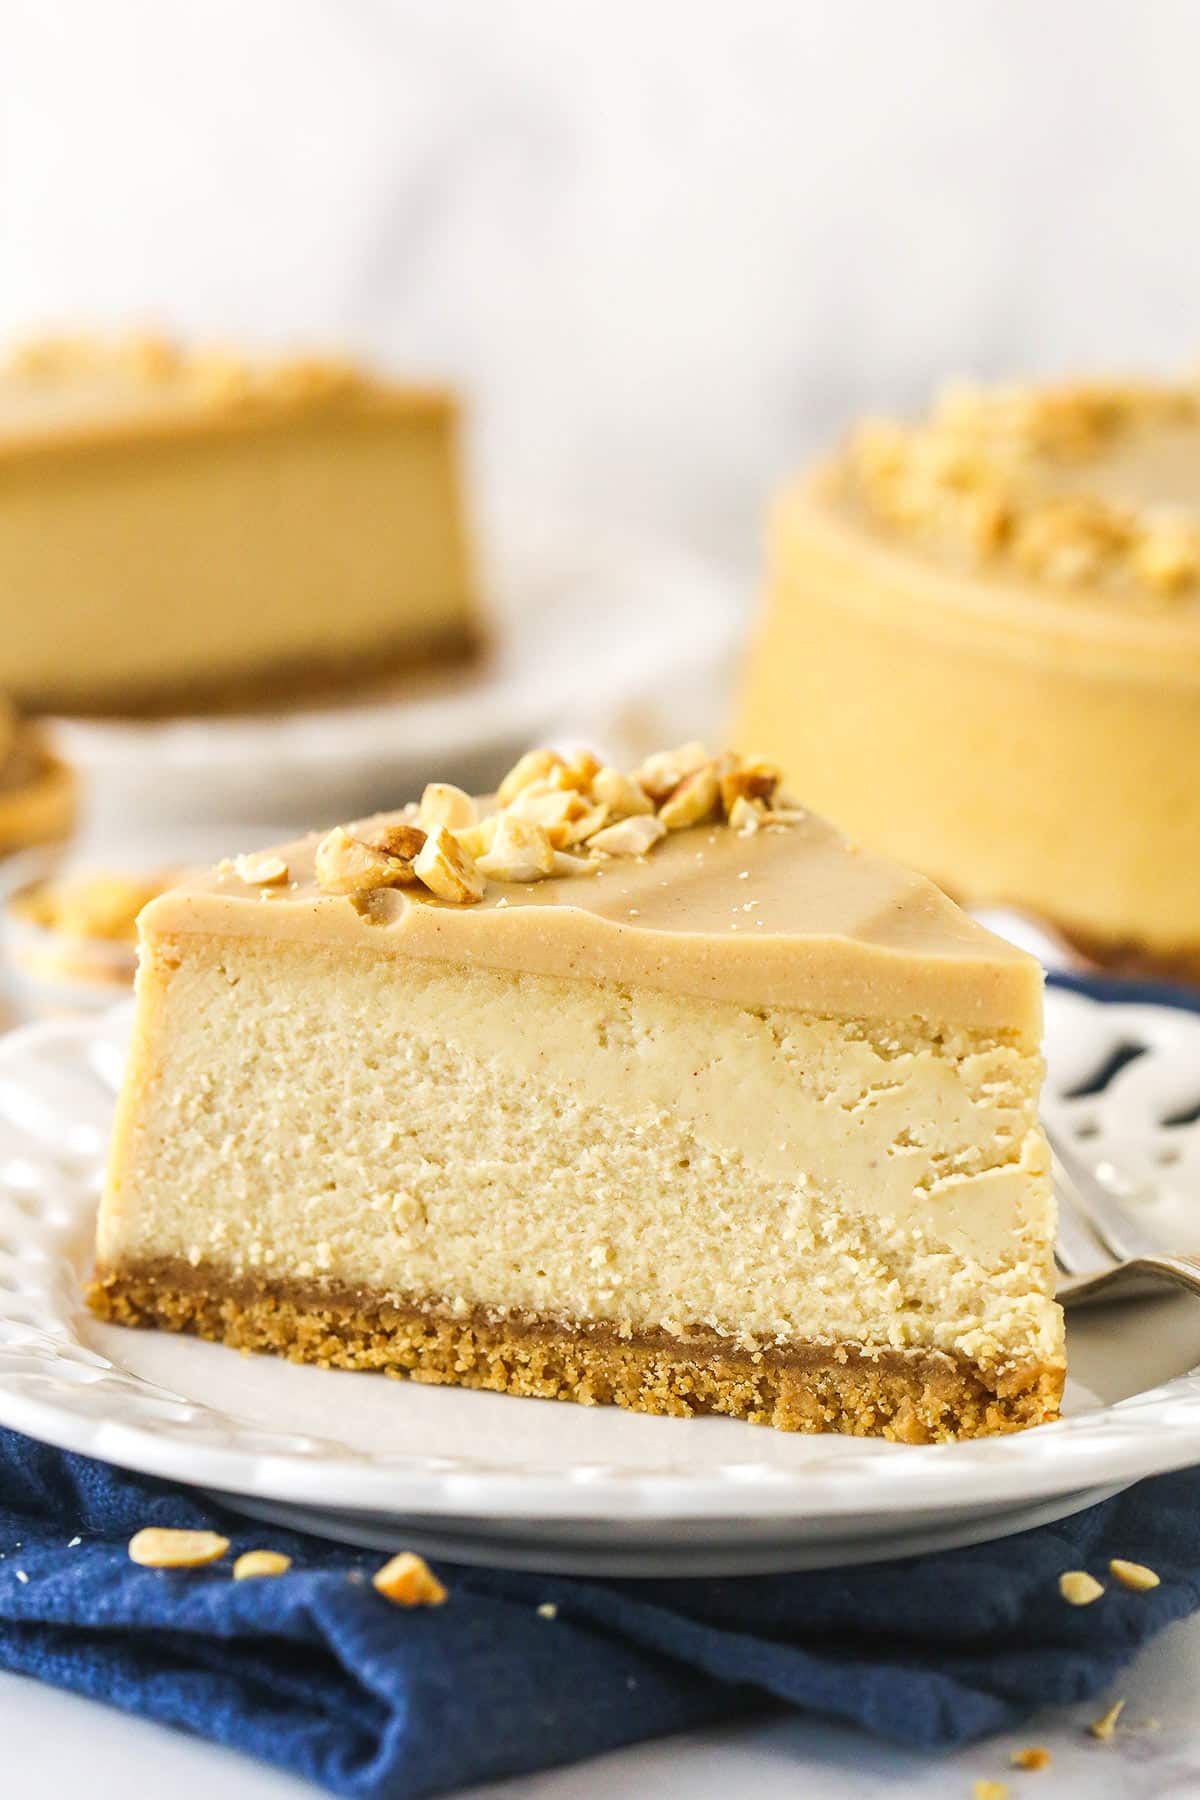 A slice of peanut butter cheesecake on a plate.